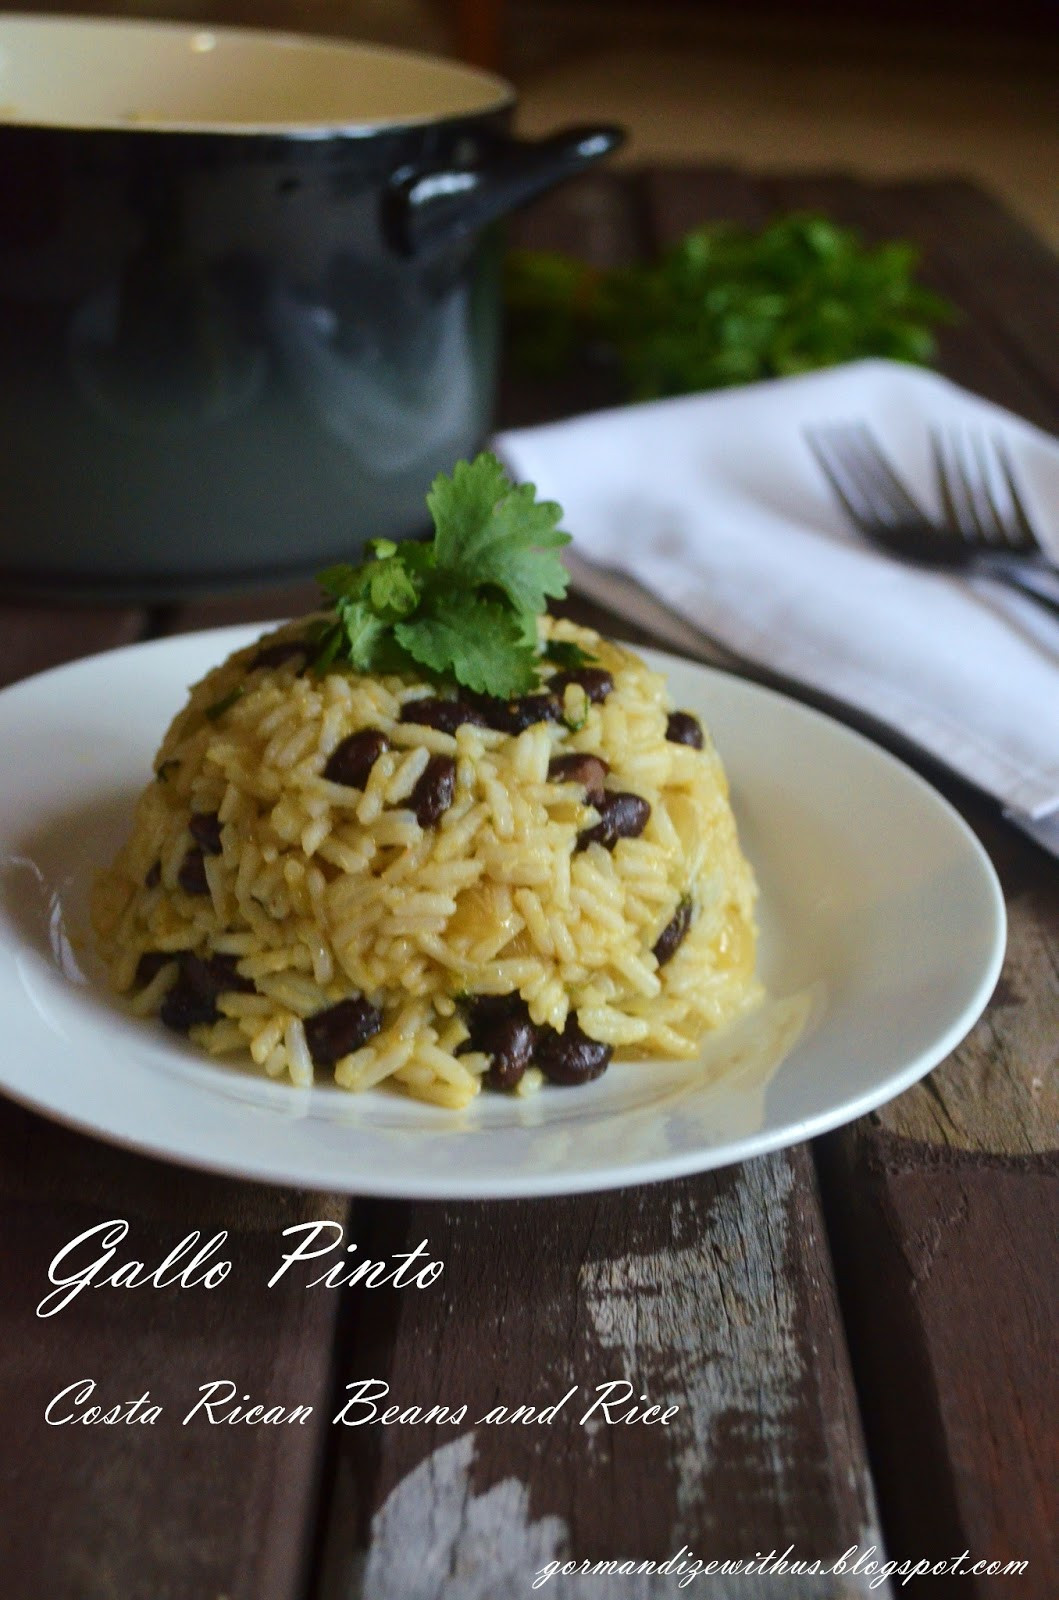 Costa Rican Rice And Beans
 Gormandize Gallo Pinto Costa Rican Beans and Rice